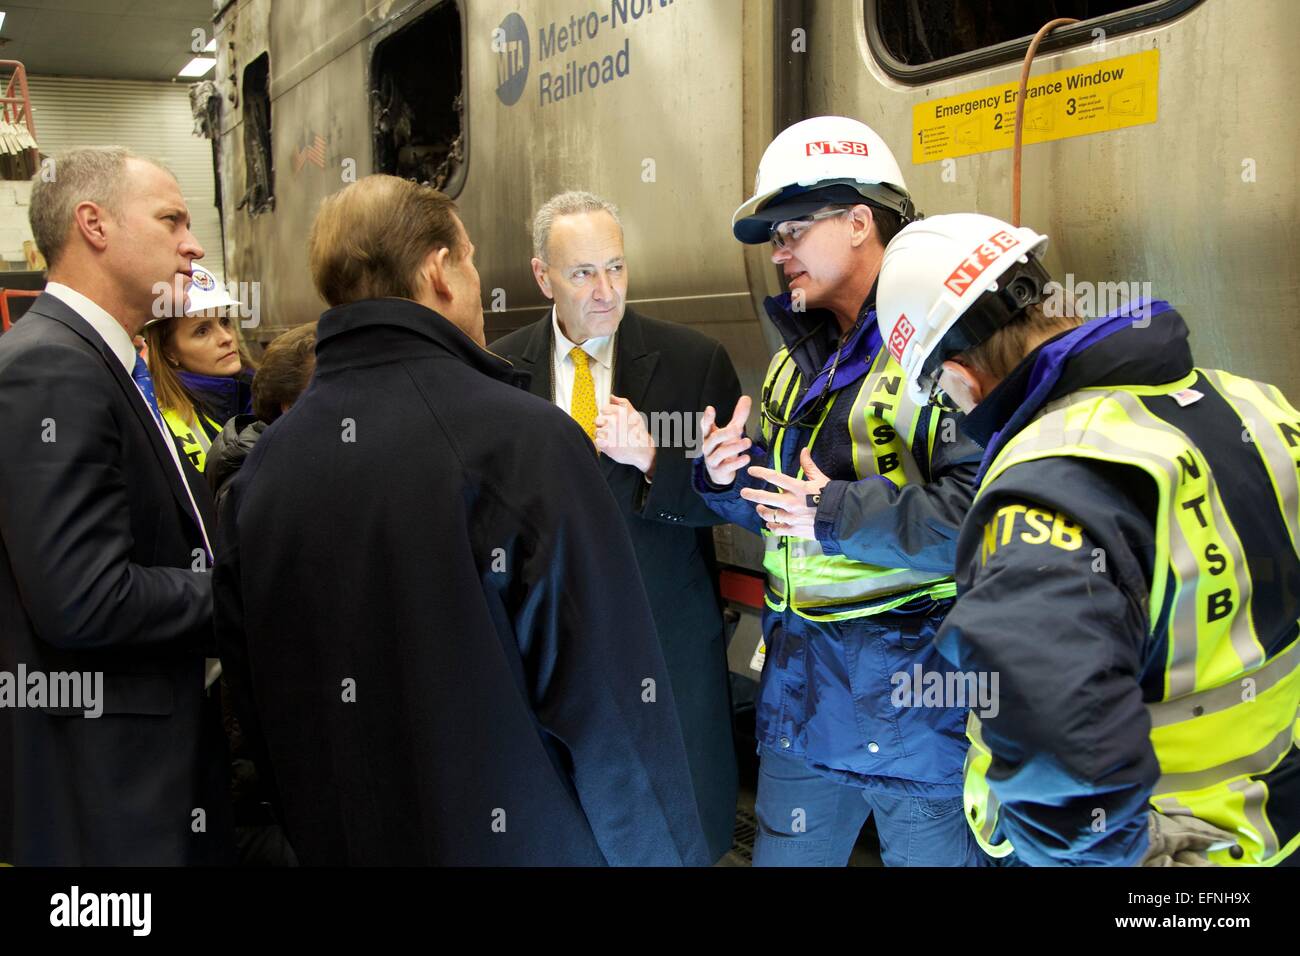 US Senator Chuck Schumer (center) is briefed by NTSB accident investigators as he visits the charred wreckage of a Metro North train car that collided with an SUV killing six people and injuring 12 others injured February 6, 2015 in New York's Westchester county. Stock Photo